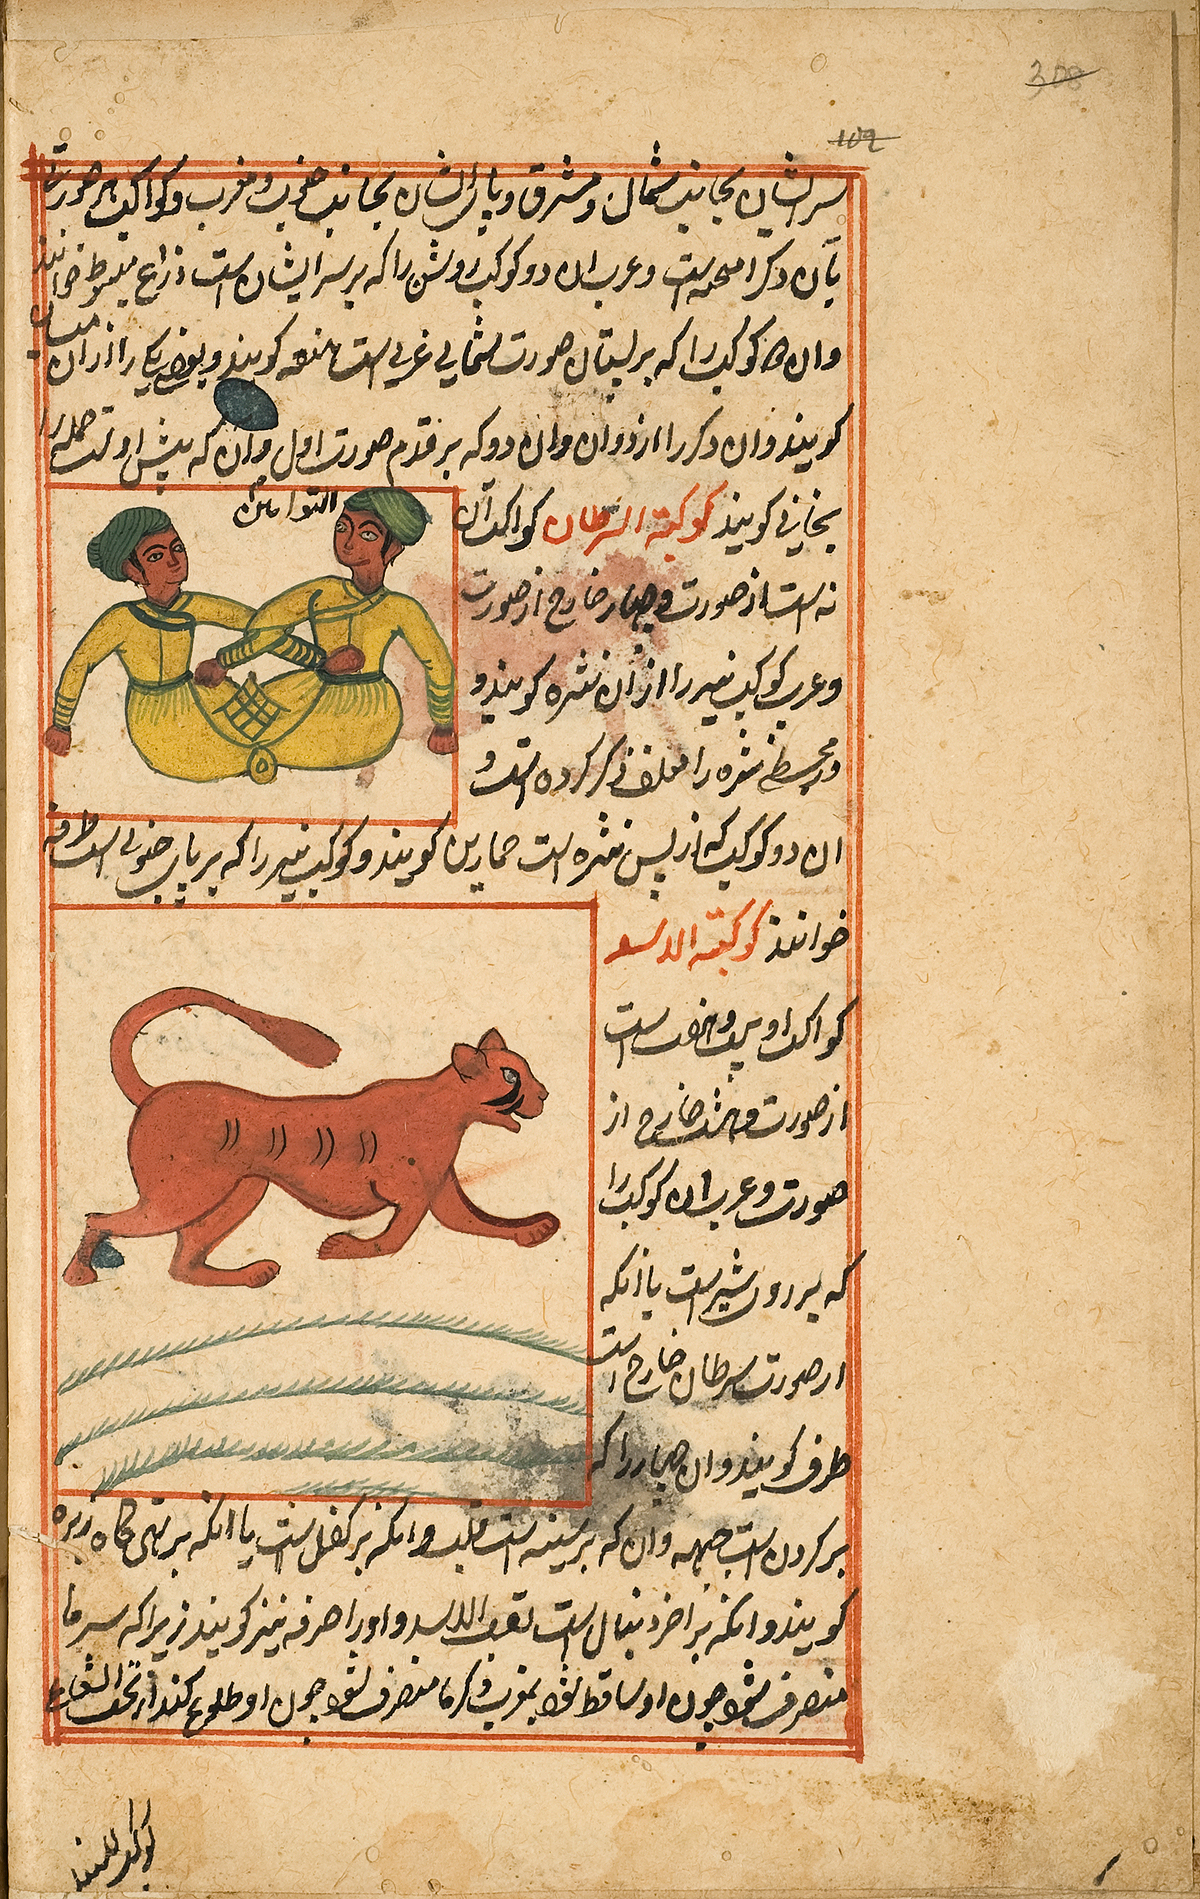 The zodiac constellation Gemini represented as seated twin boys in yellow robes with green turbans, and the constellation Leo represented as an orange lion running; both images surrounded by Persian text and a red double ruled border.